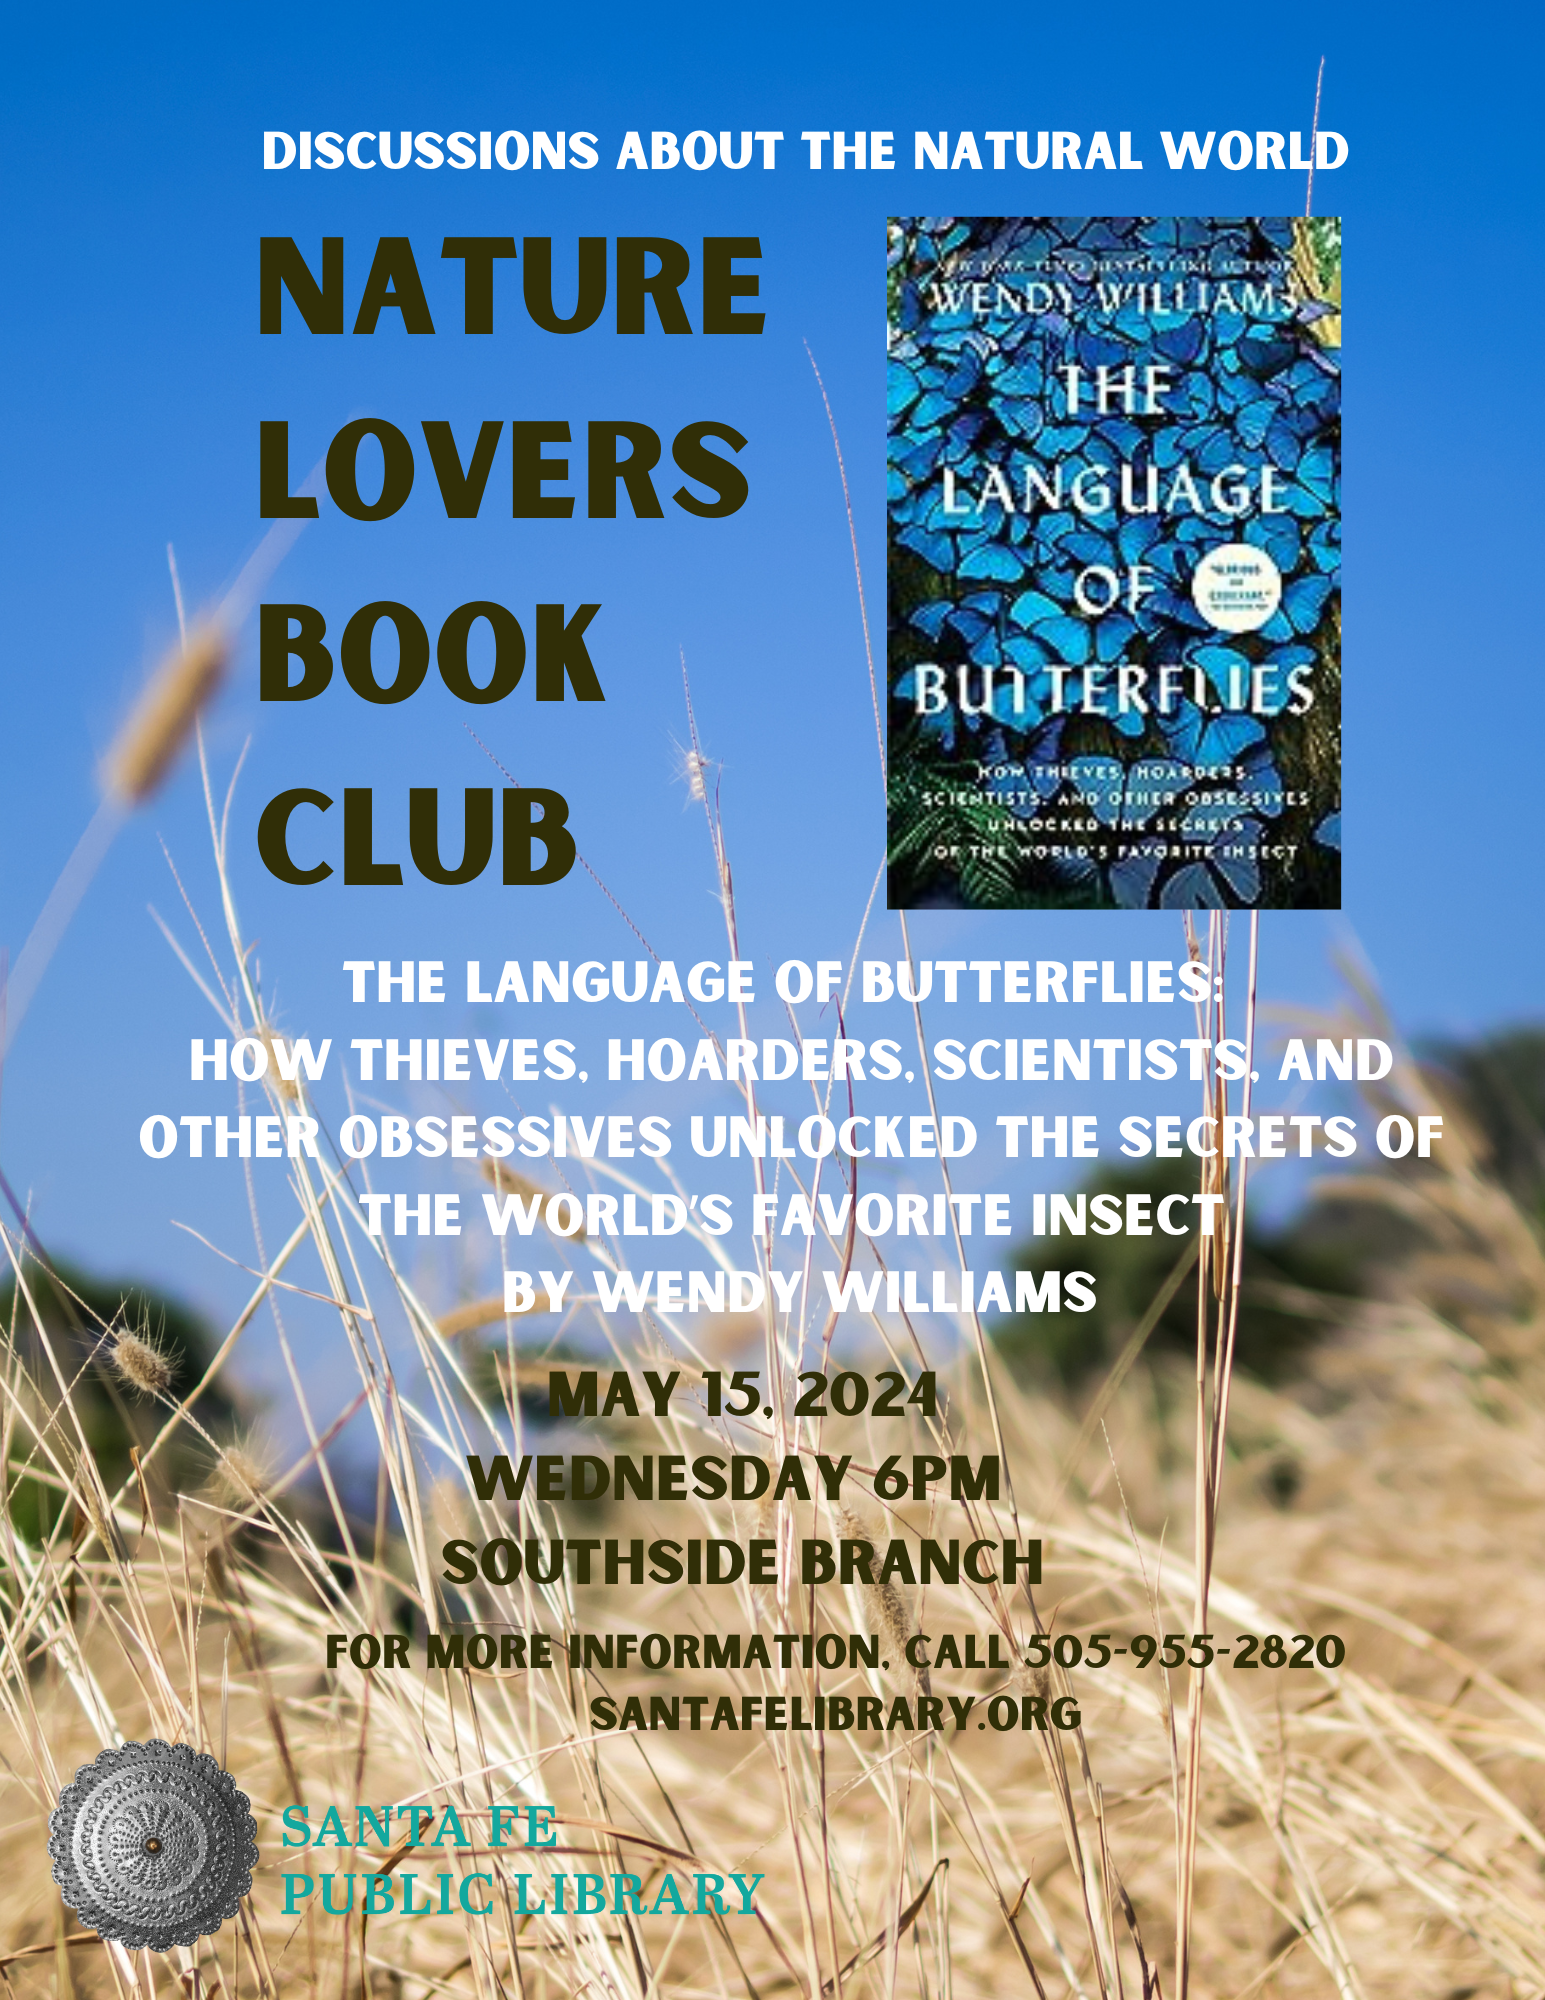 Nature Lovers Book Club discusses The Language of Butterflies